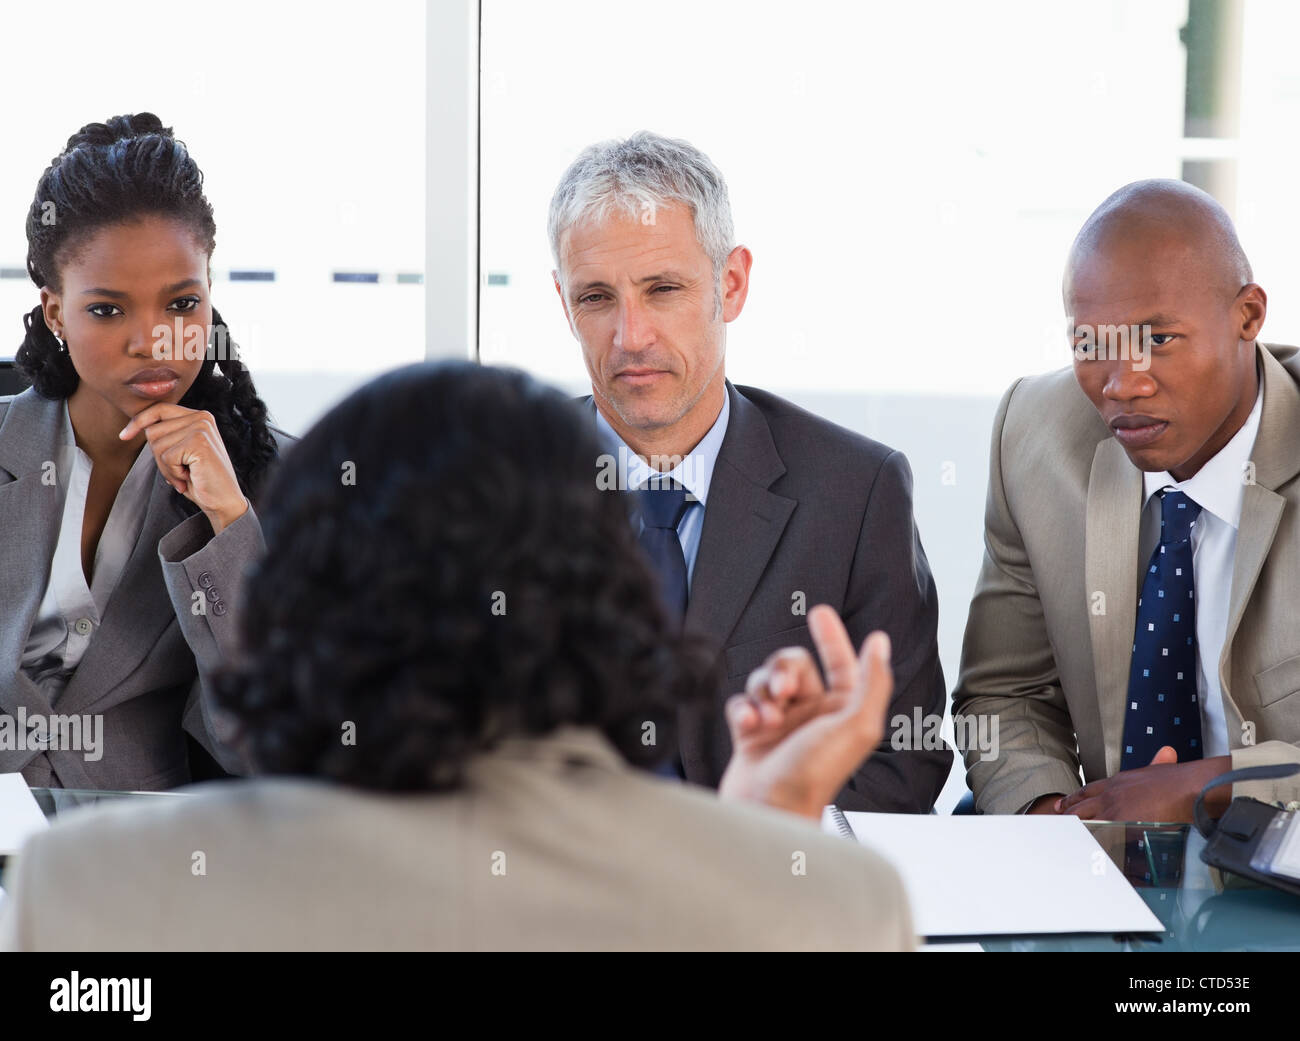 Three business people attentively listening to a speaker in a meeting Stock Photo